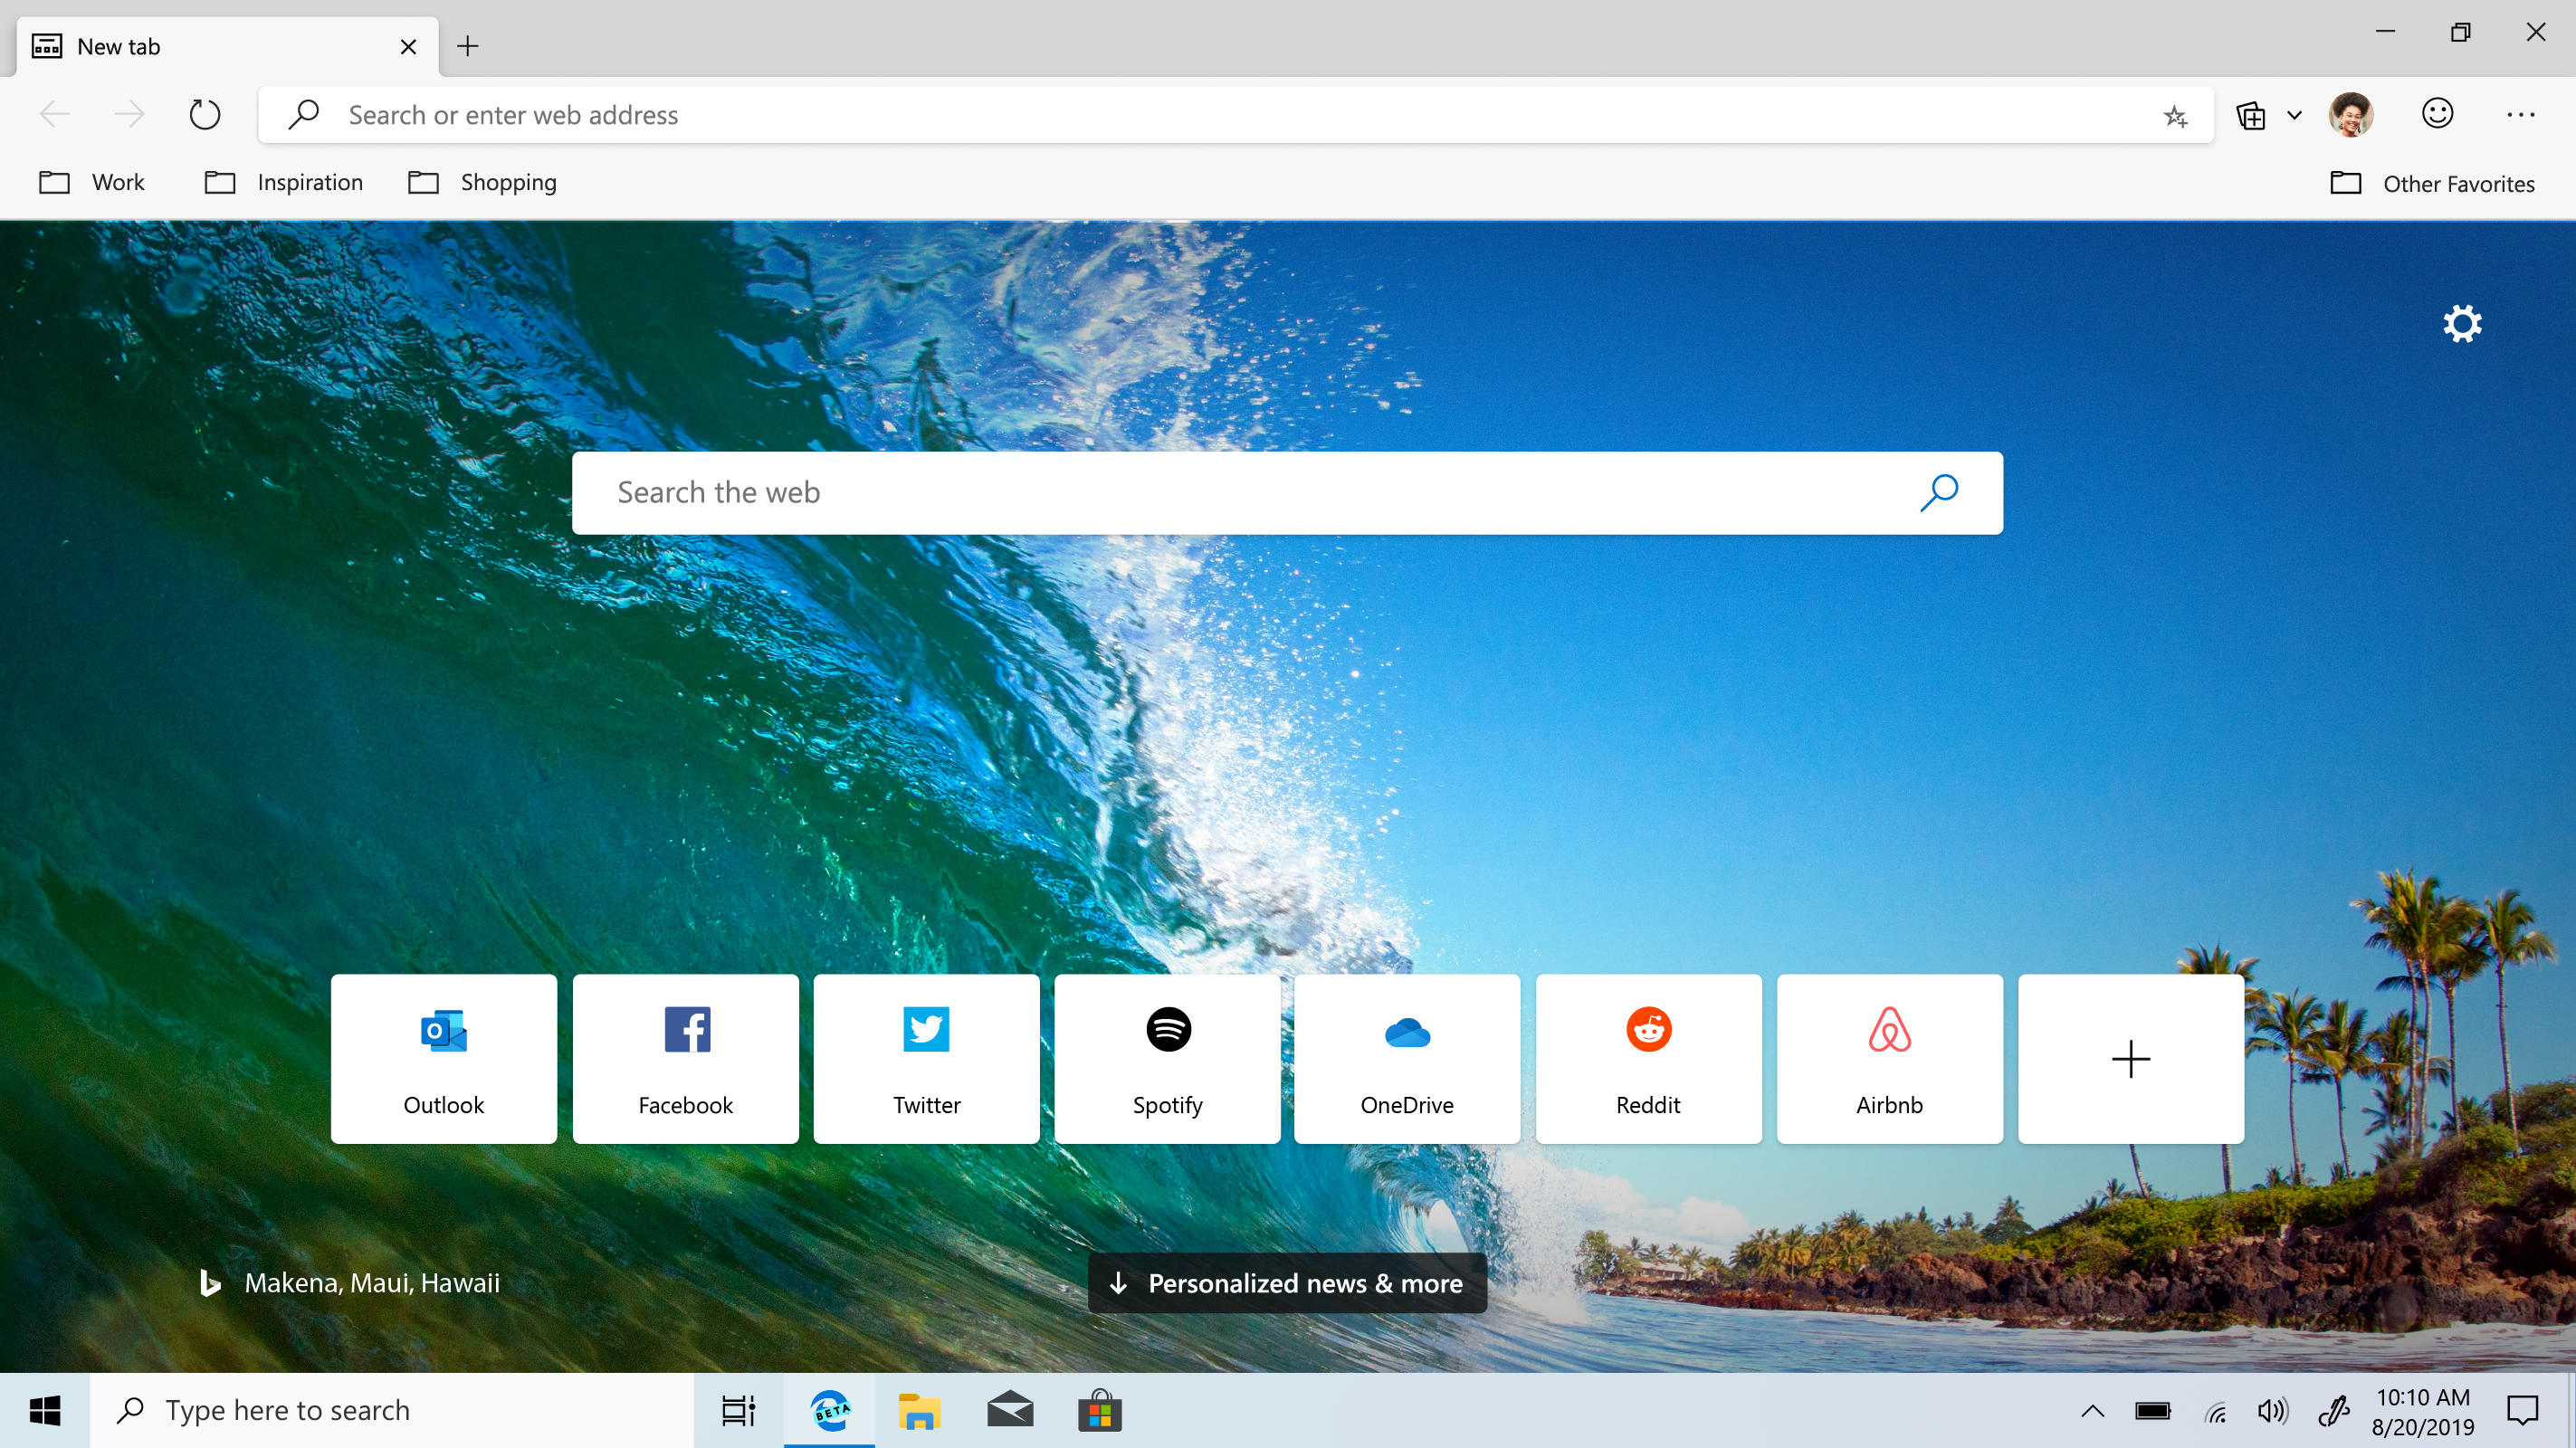 How To Keep Microsoft From Installing Edge (Chromium) On Your PC